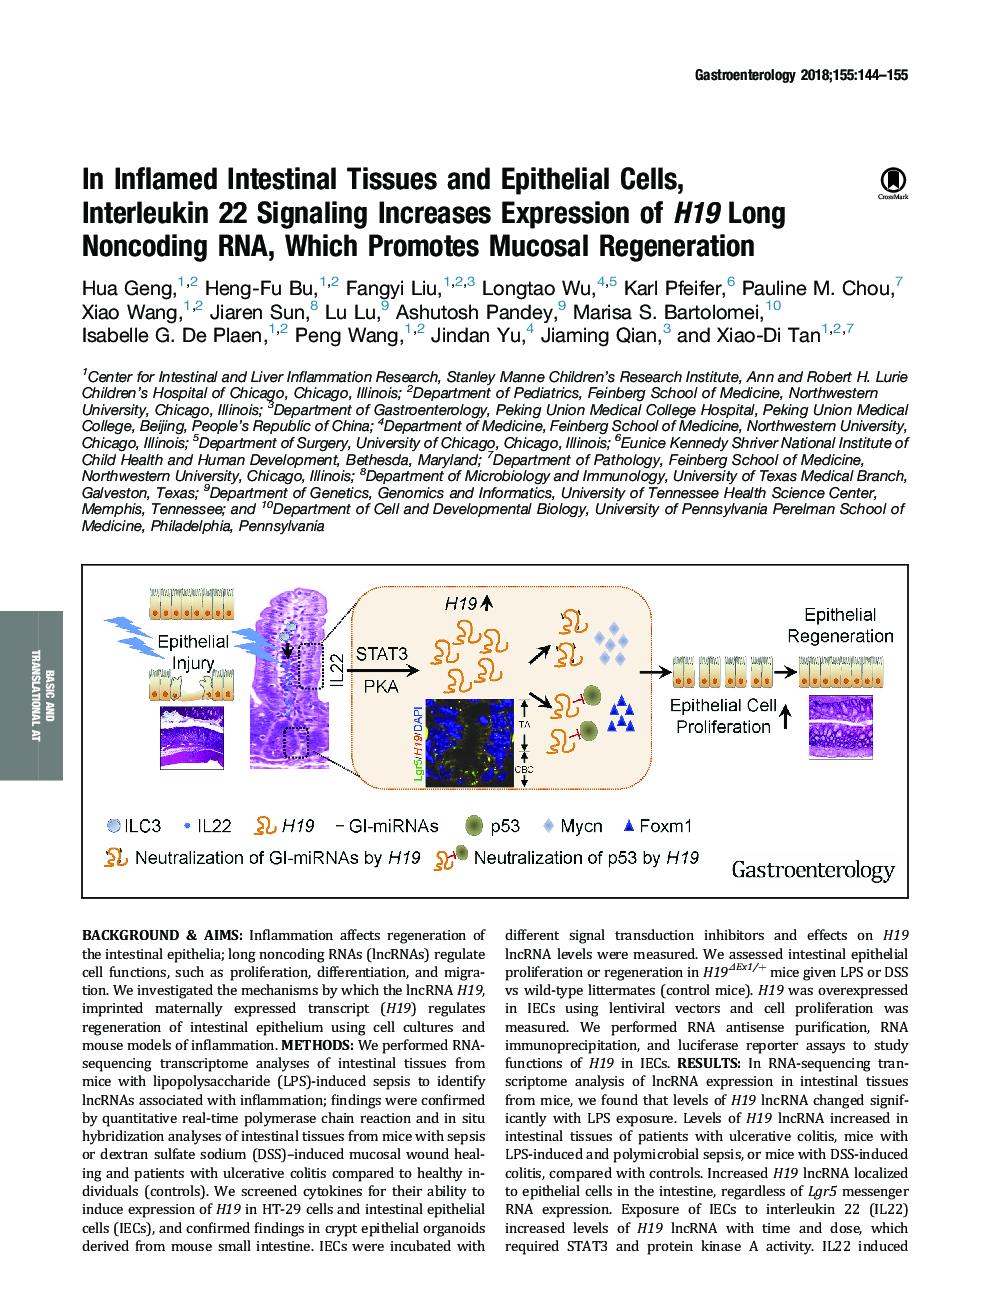 In Inflamed Intestinal Tissues and Epithelial Cells, Interleukin 22Â Signaling Increases Expression of H19 Long Noncoding RNA, Which Promotes Mucosal Regeneration